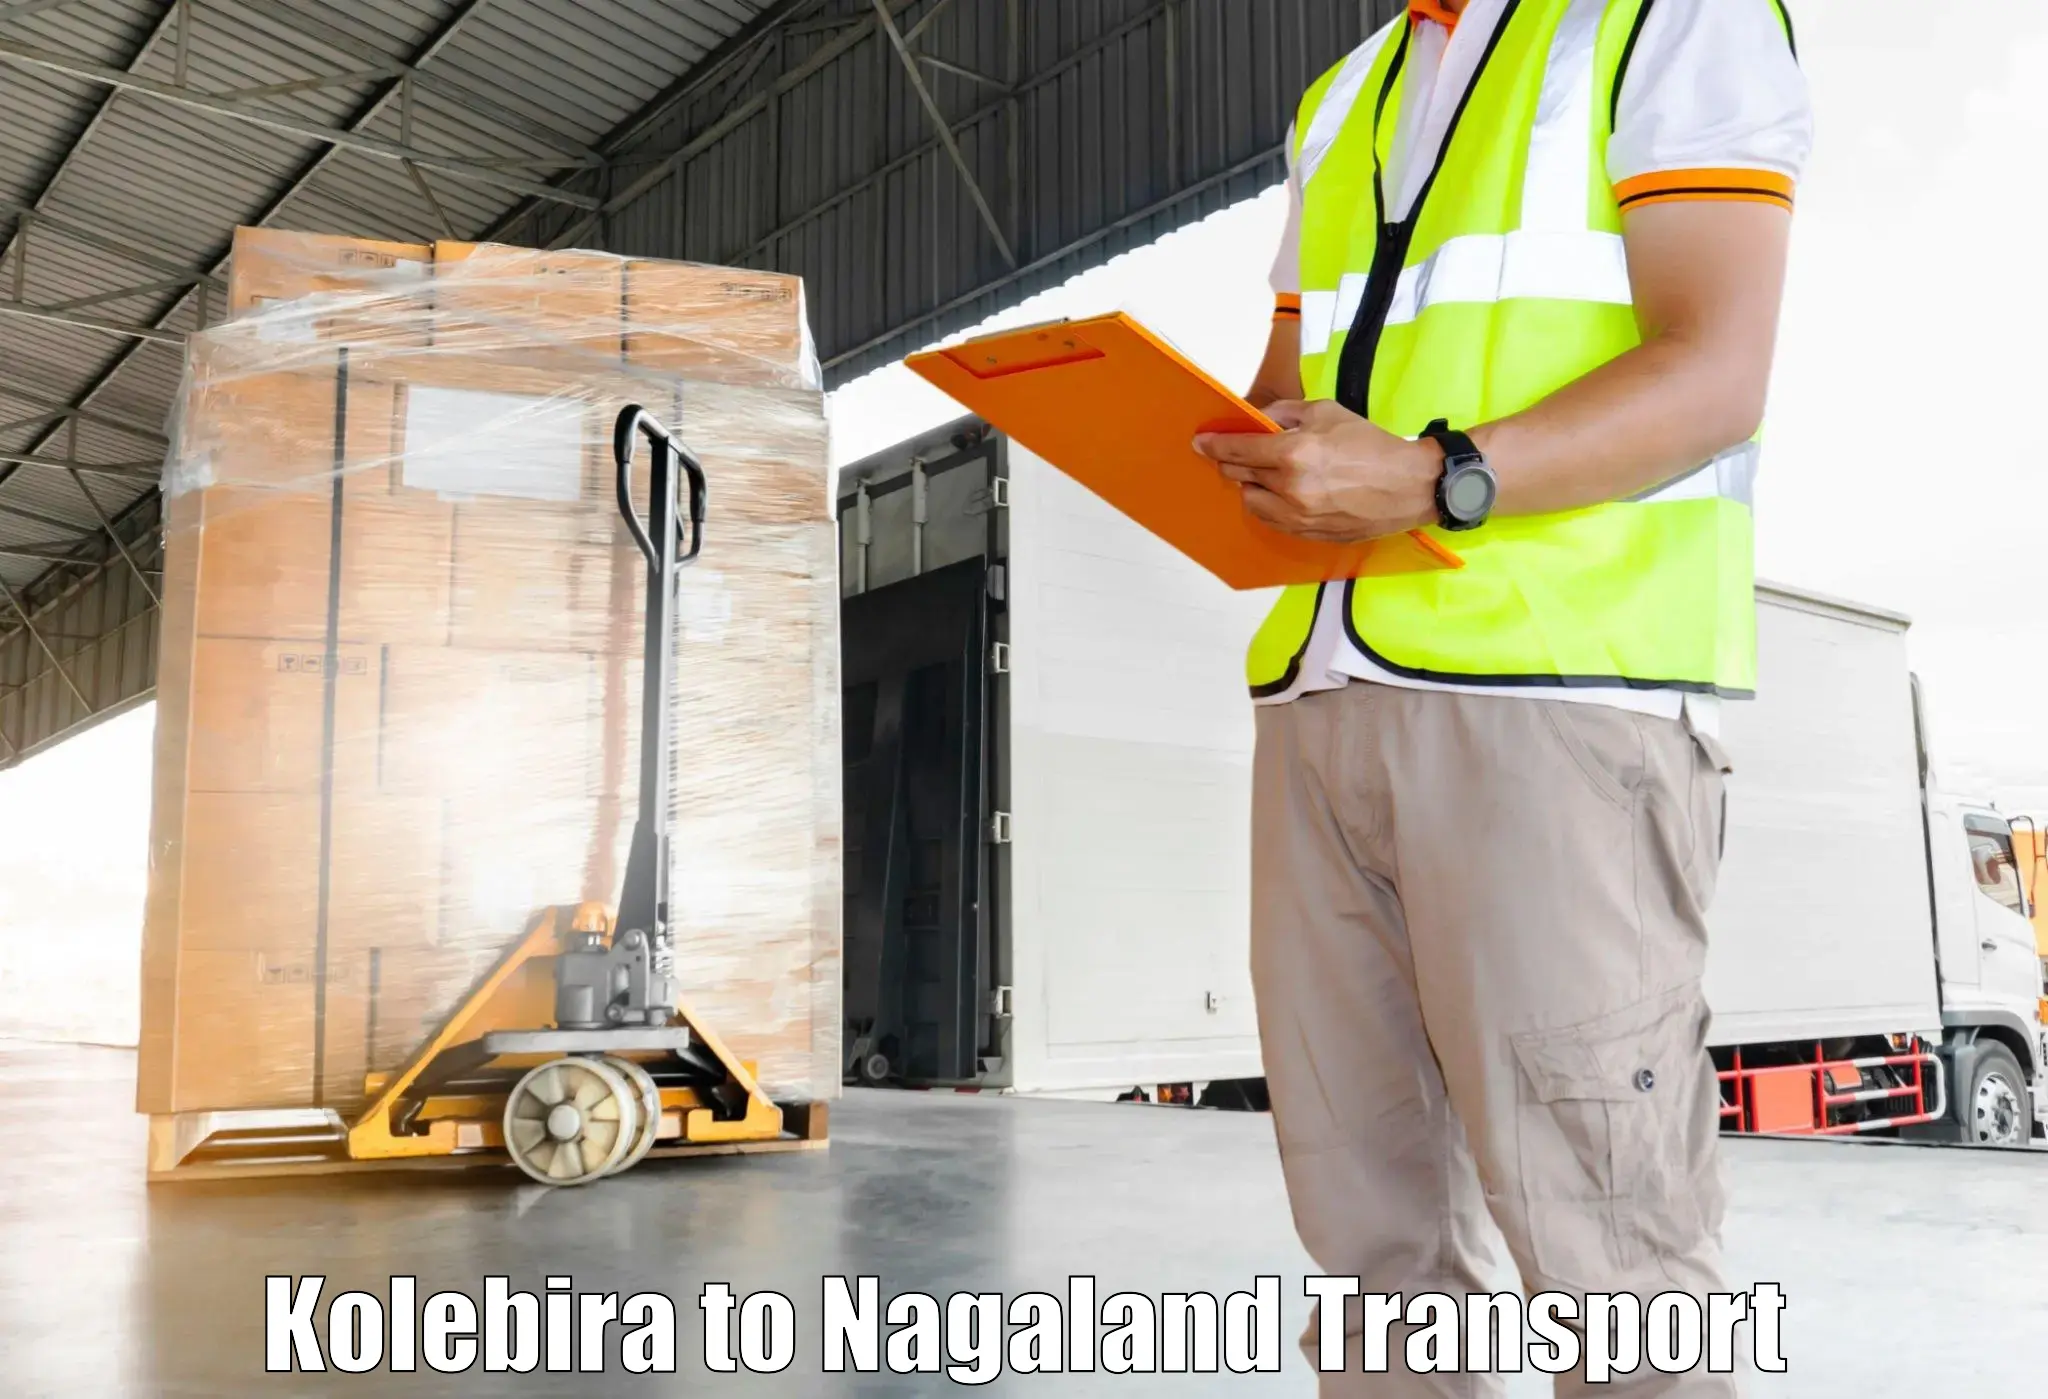 Transport bike from one state to another Kolebira to Nagaland